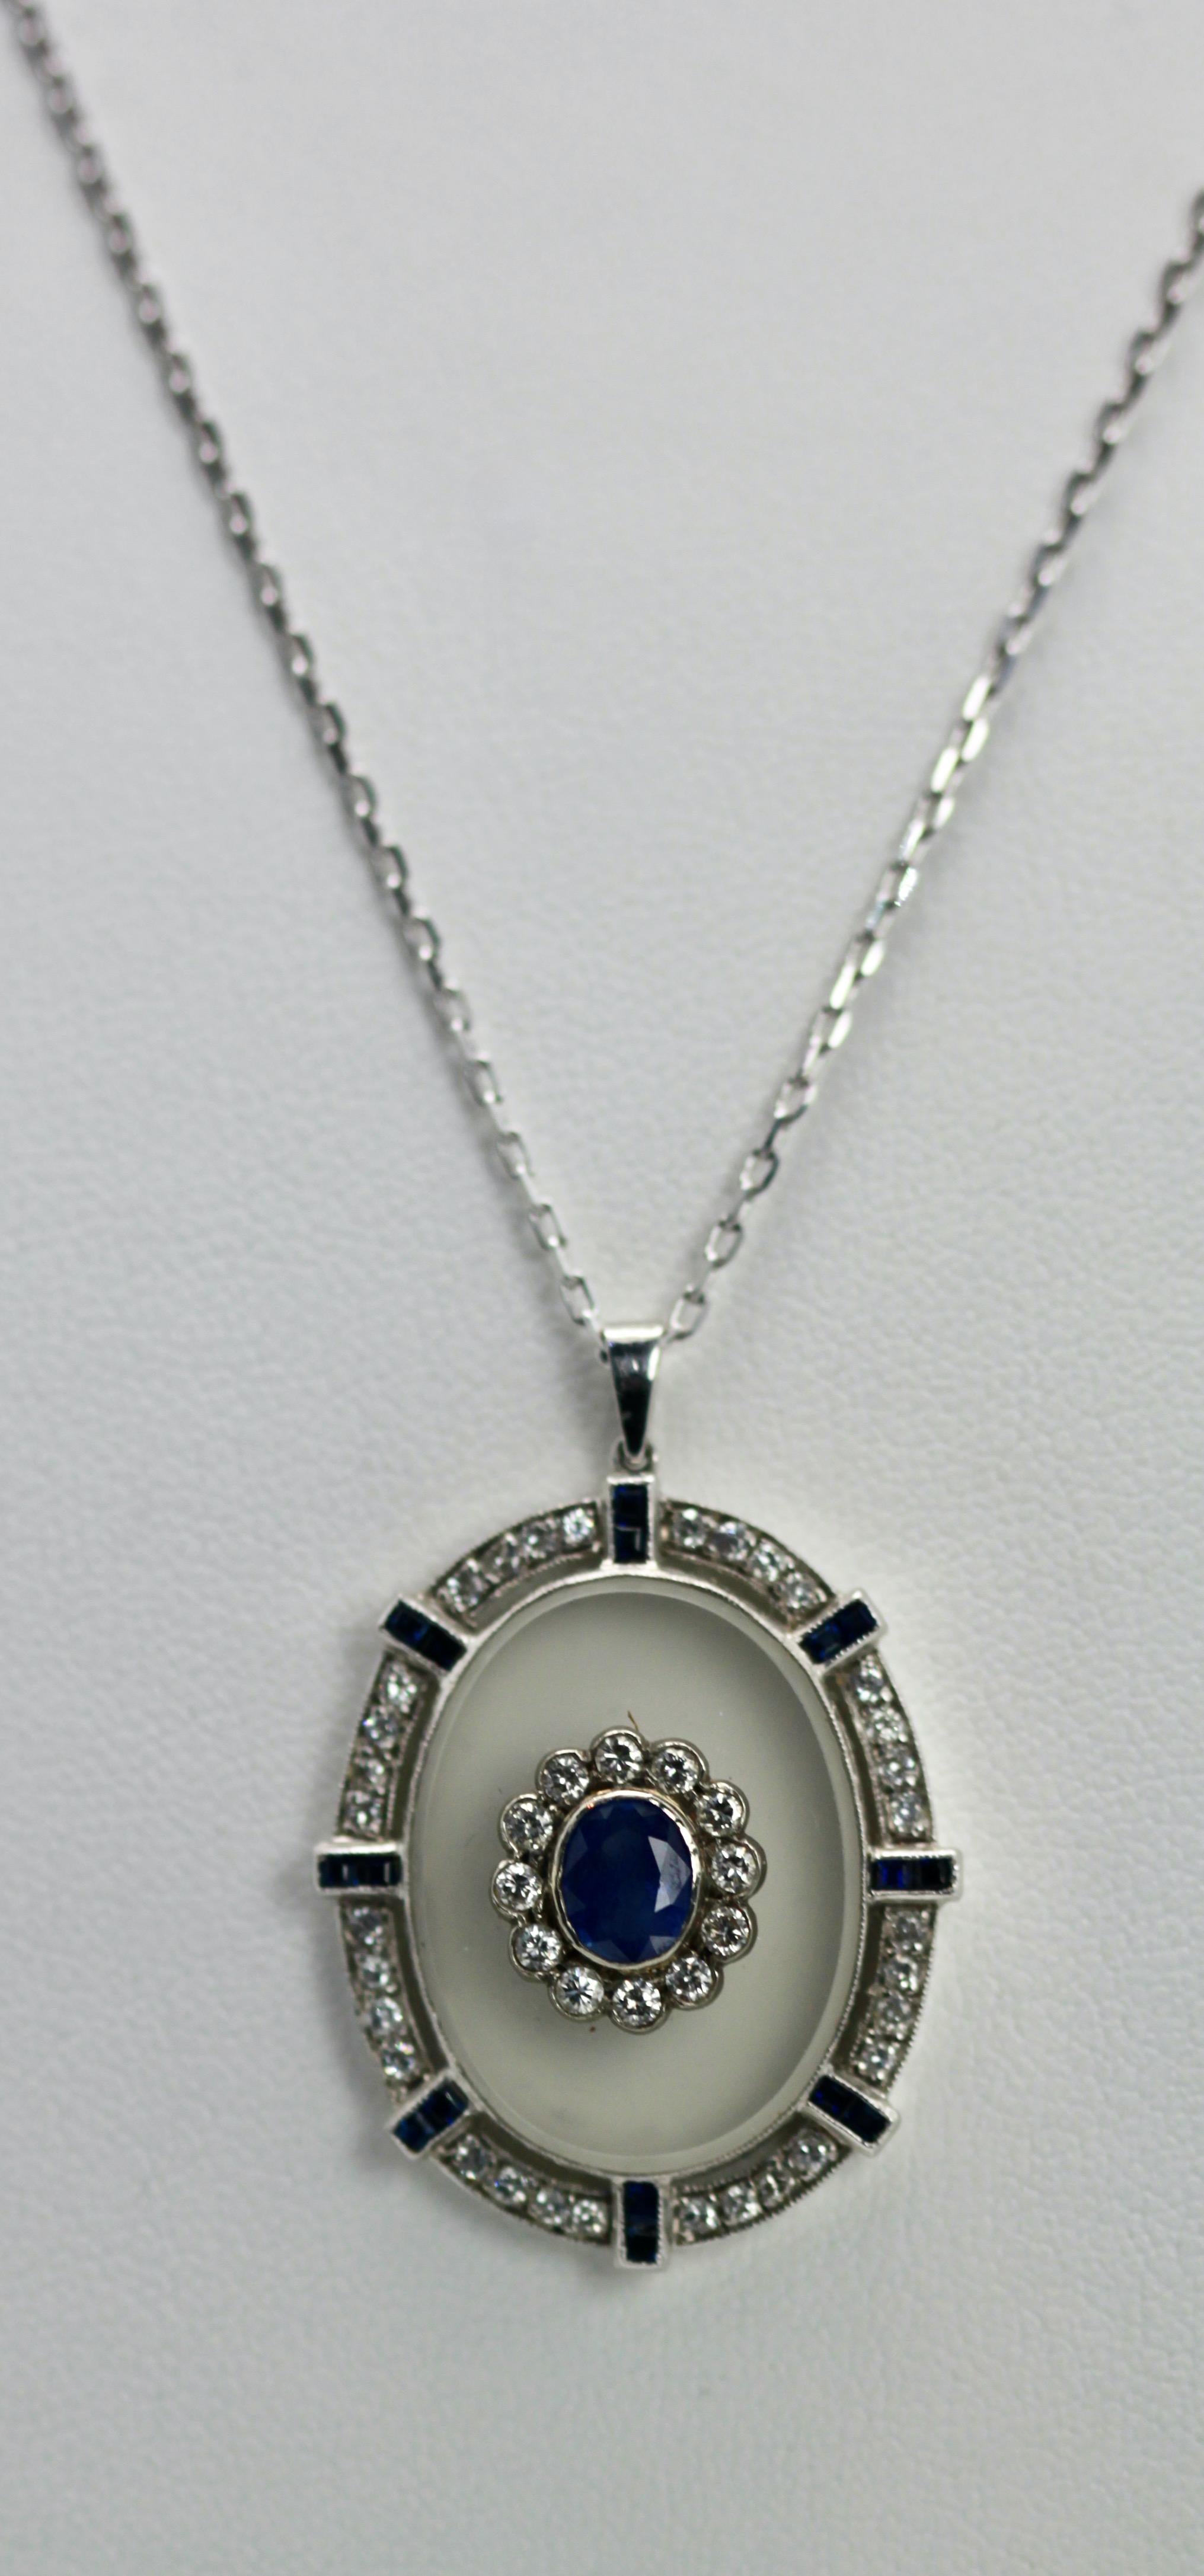 I just love this pendant. This pendant is beautiful with a frosted Rock Crystal base set with a Sapphire with Diamond surround.  The crystal is set with Diamonds and Sapphires on a simple chain.  The center stone is 0.75 carats, each baguette stone